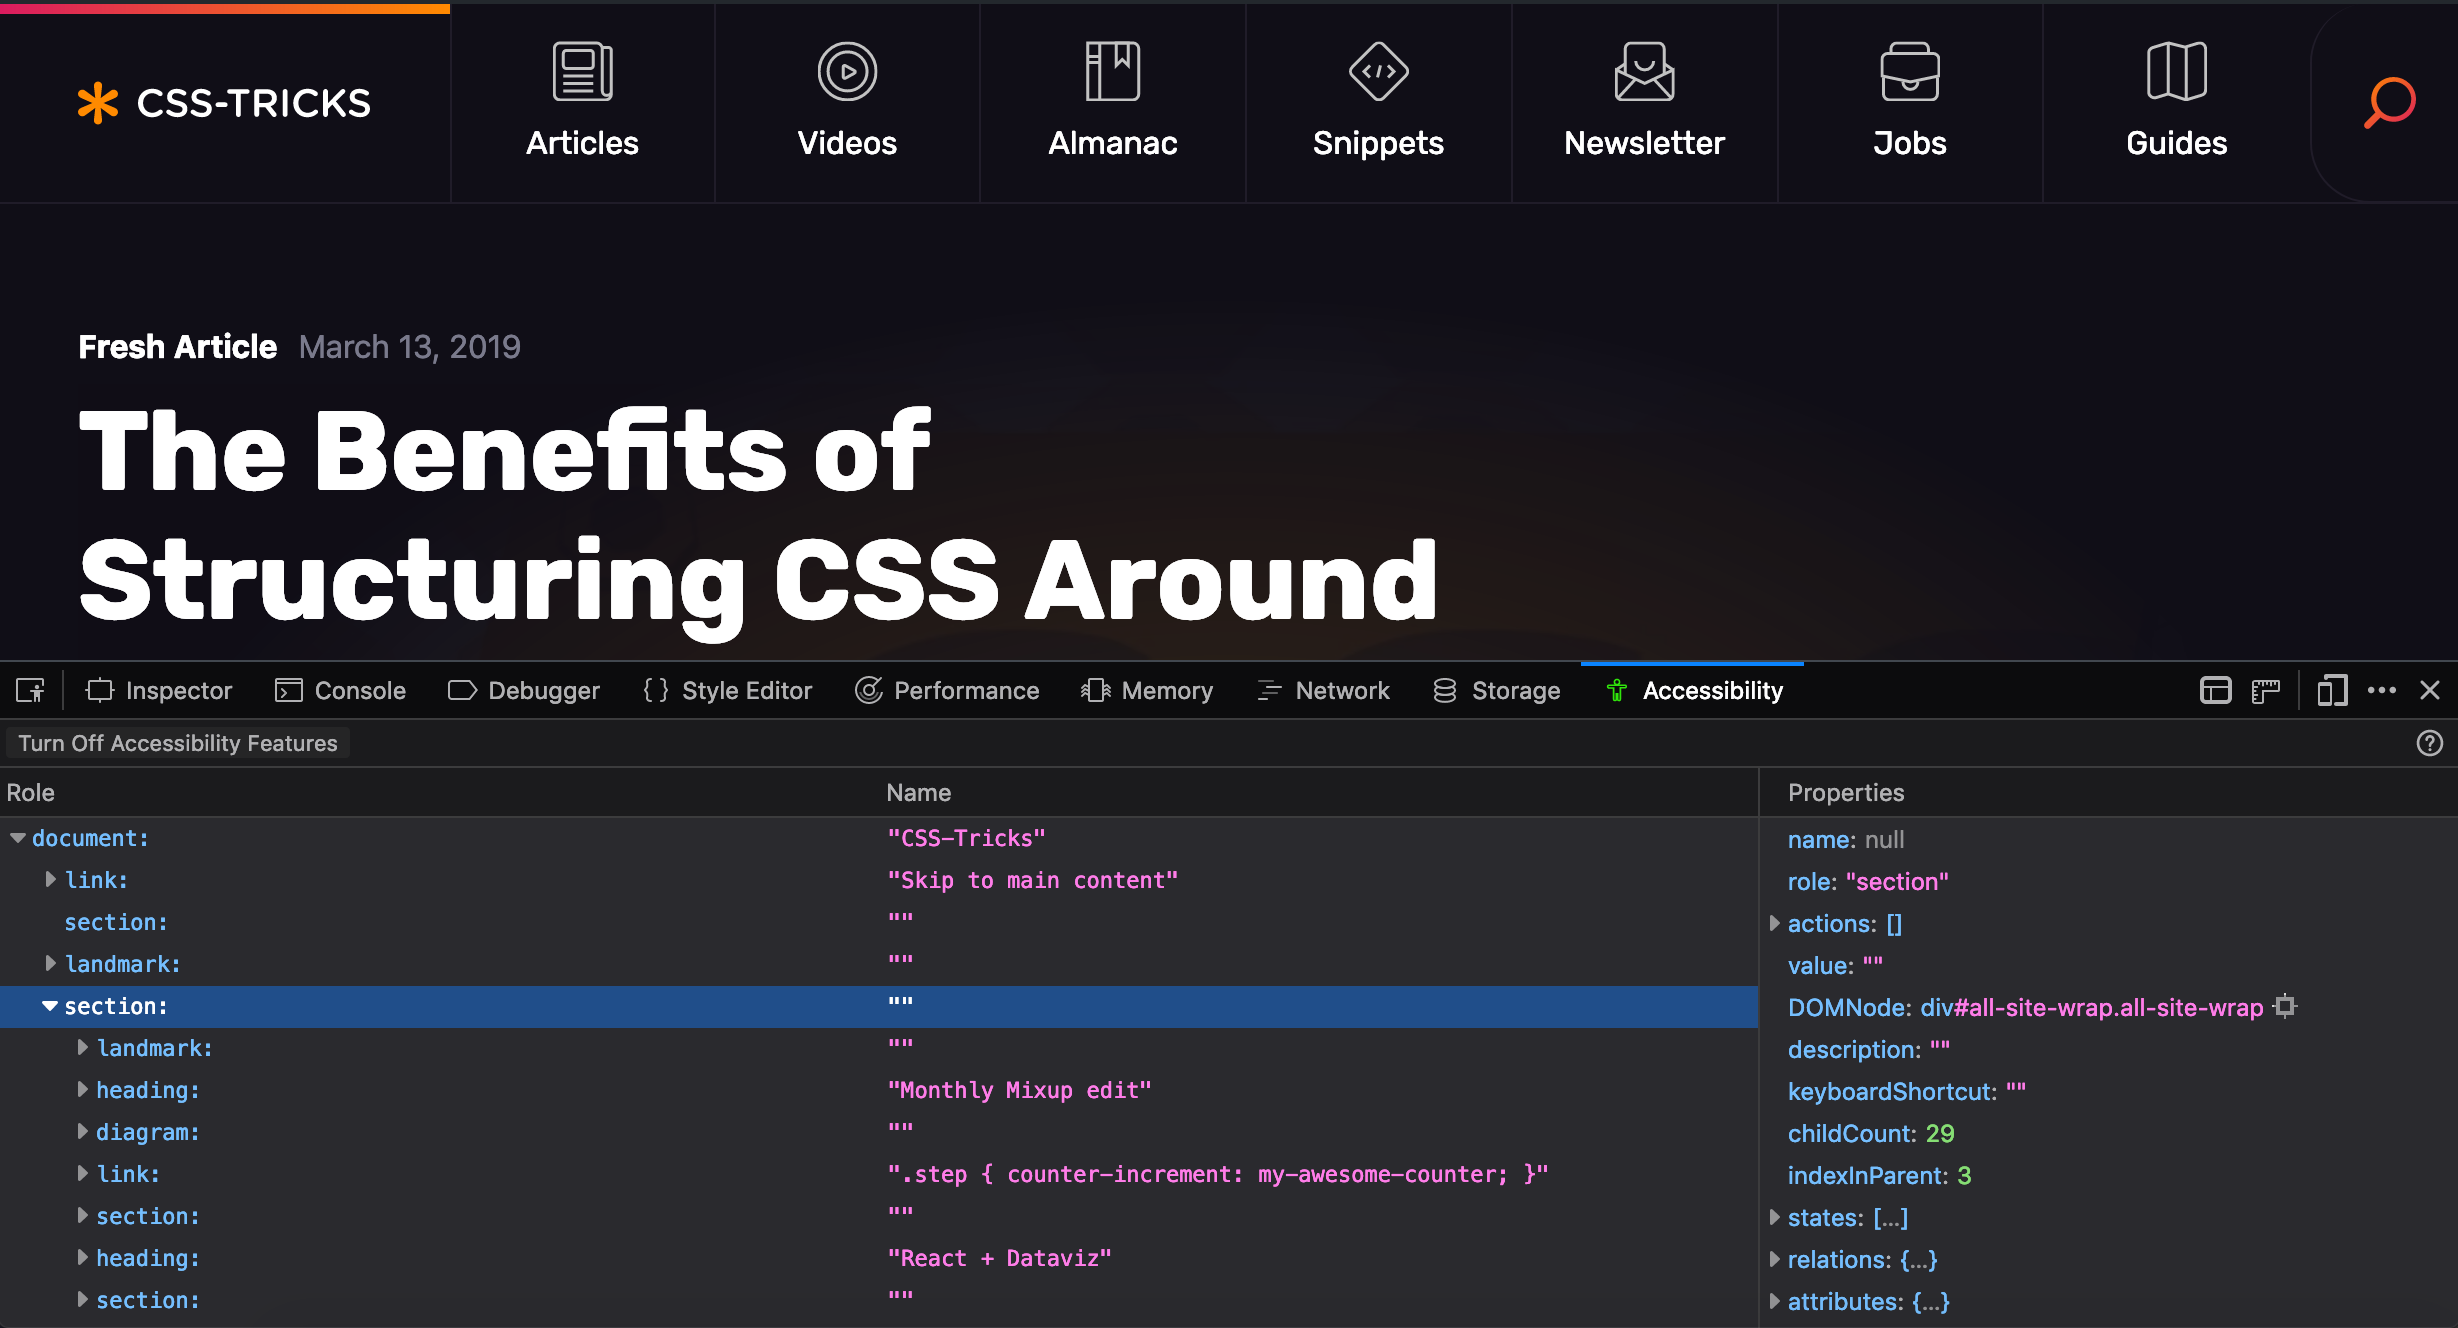 An image of the Firefox Accessibility tool inspecting the CSS-Tricks website